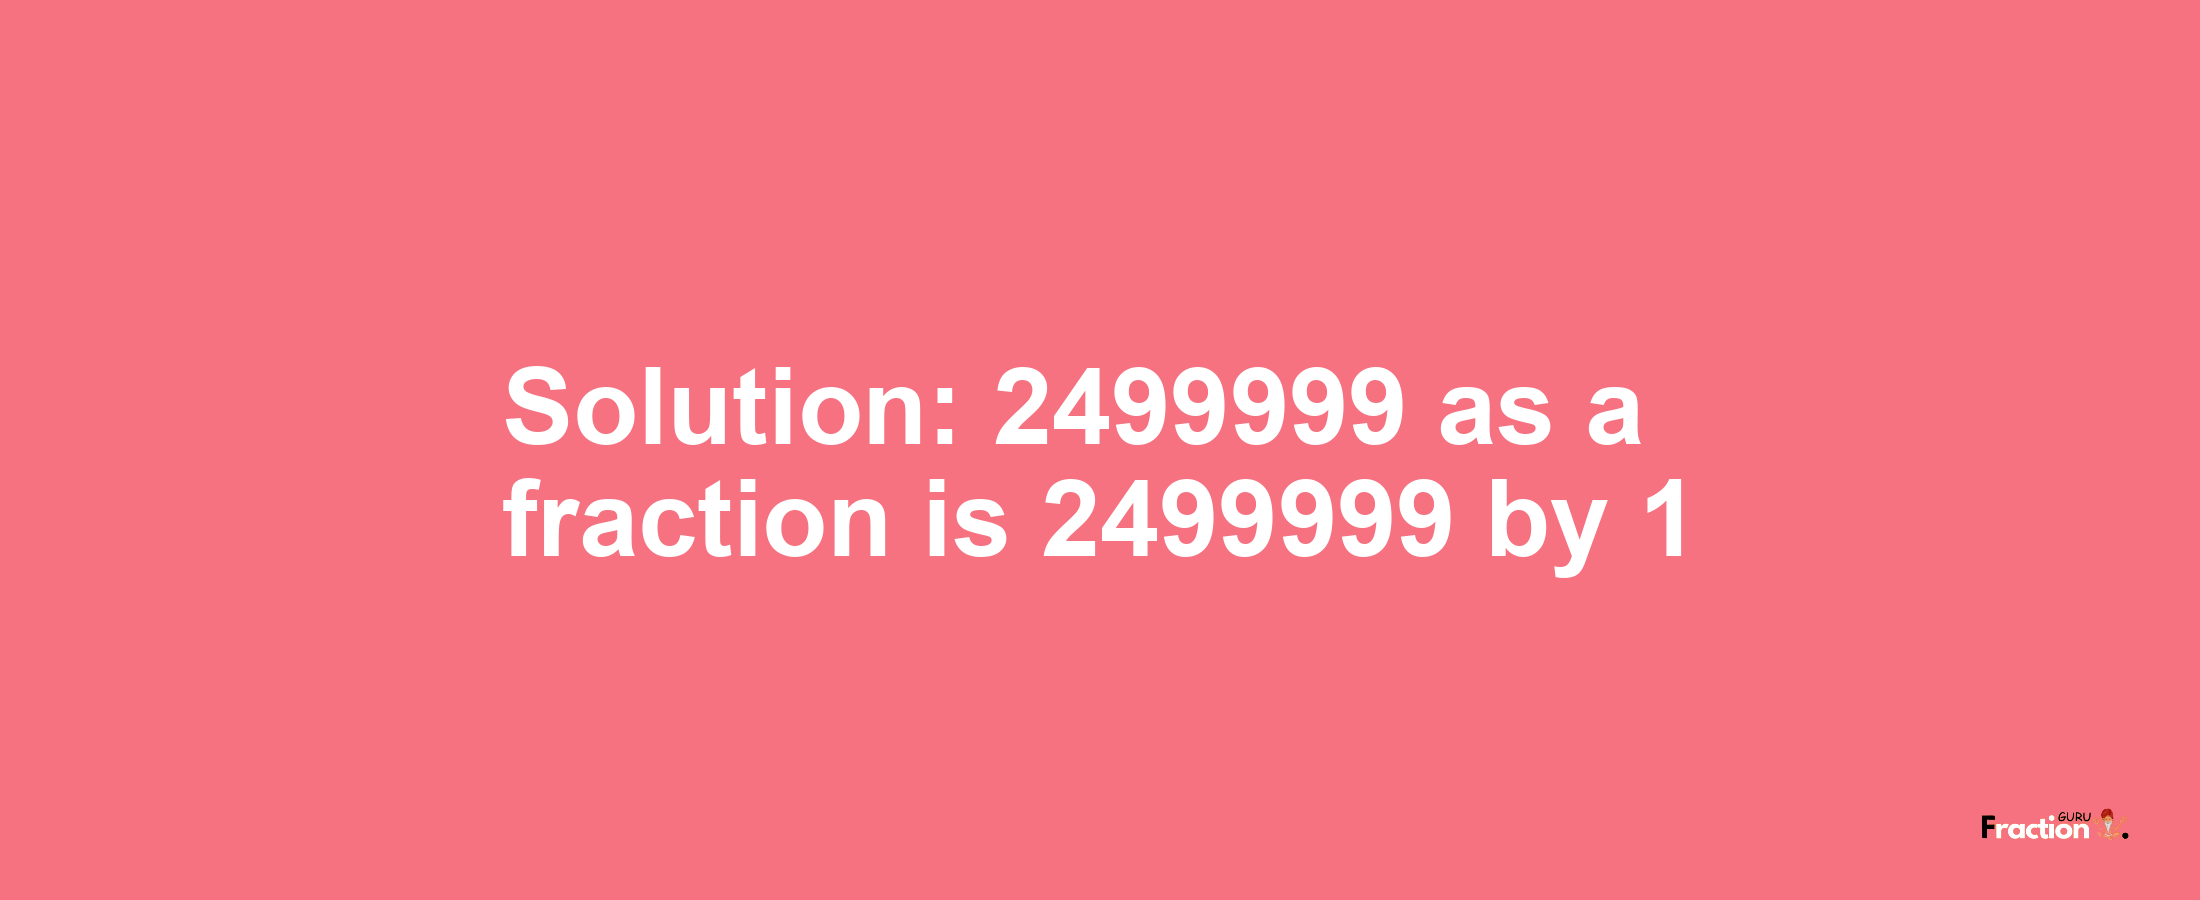 Solution:2499999 as a fraction is 2499999/1